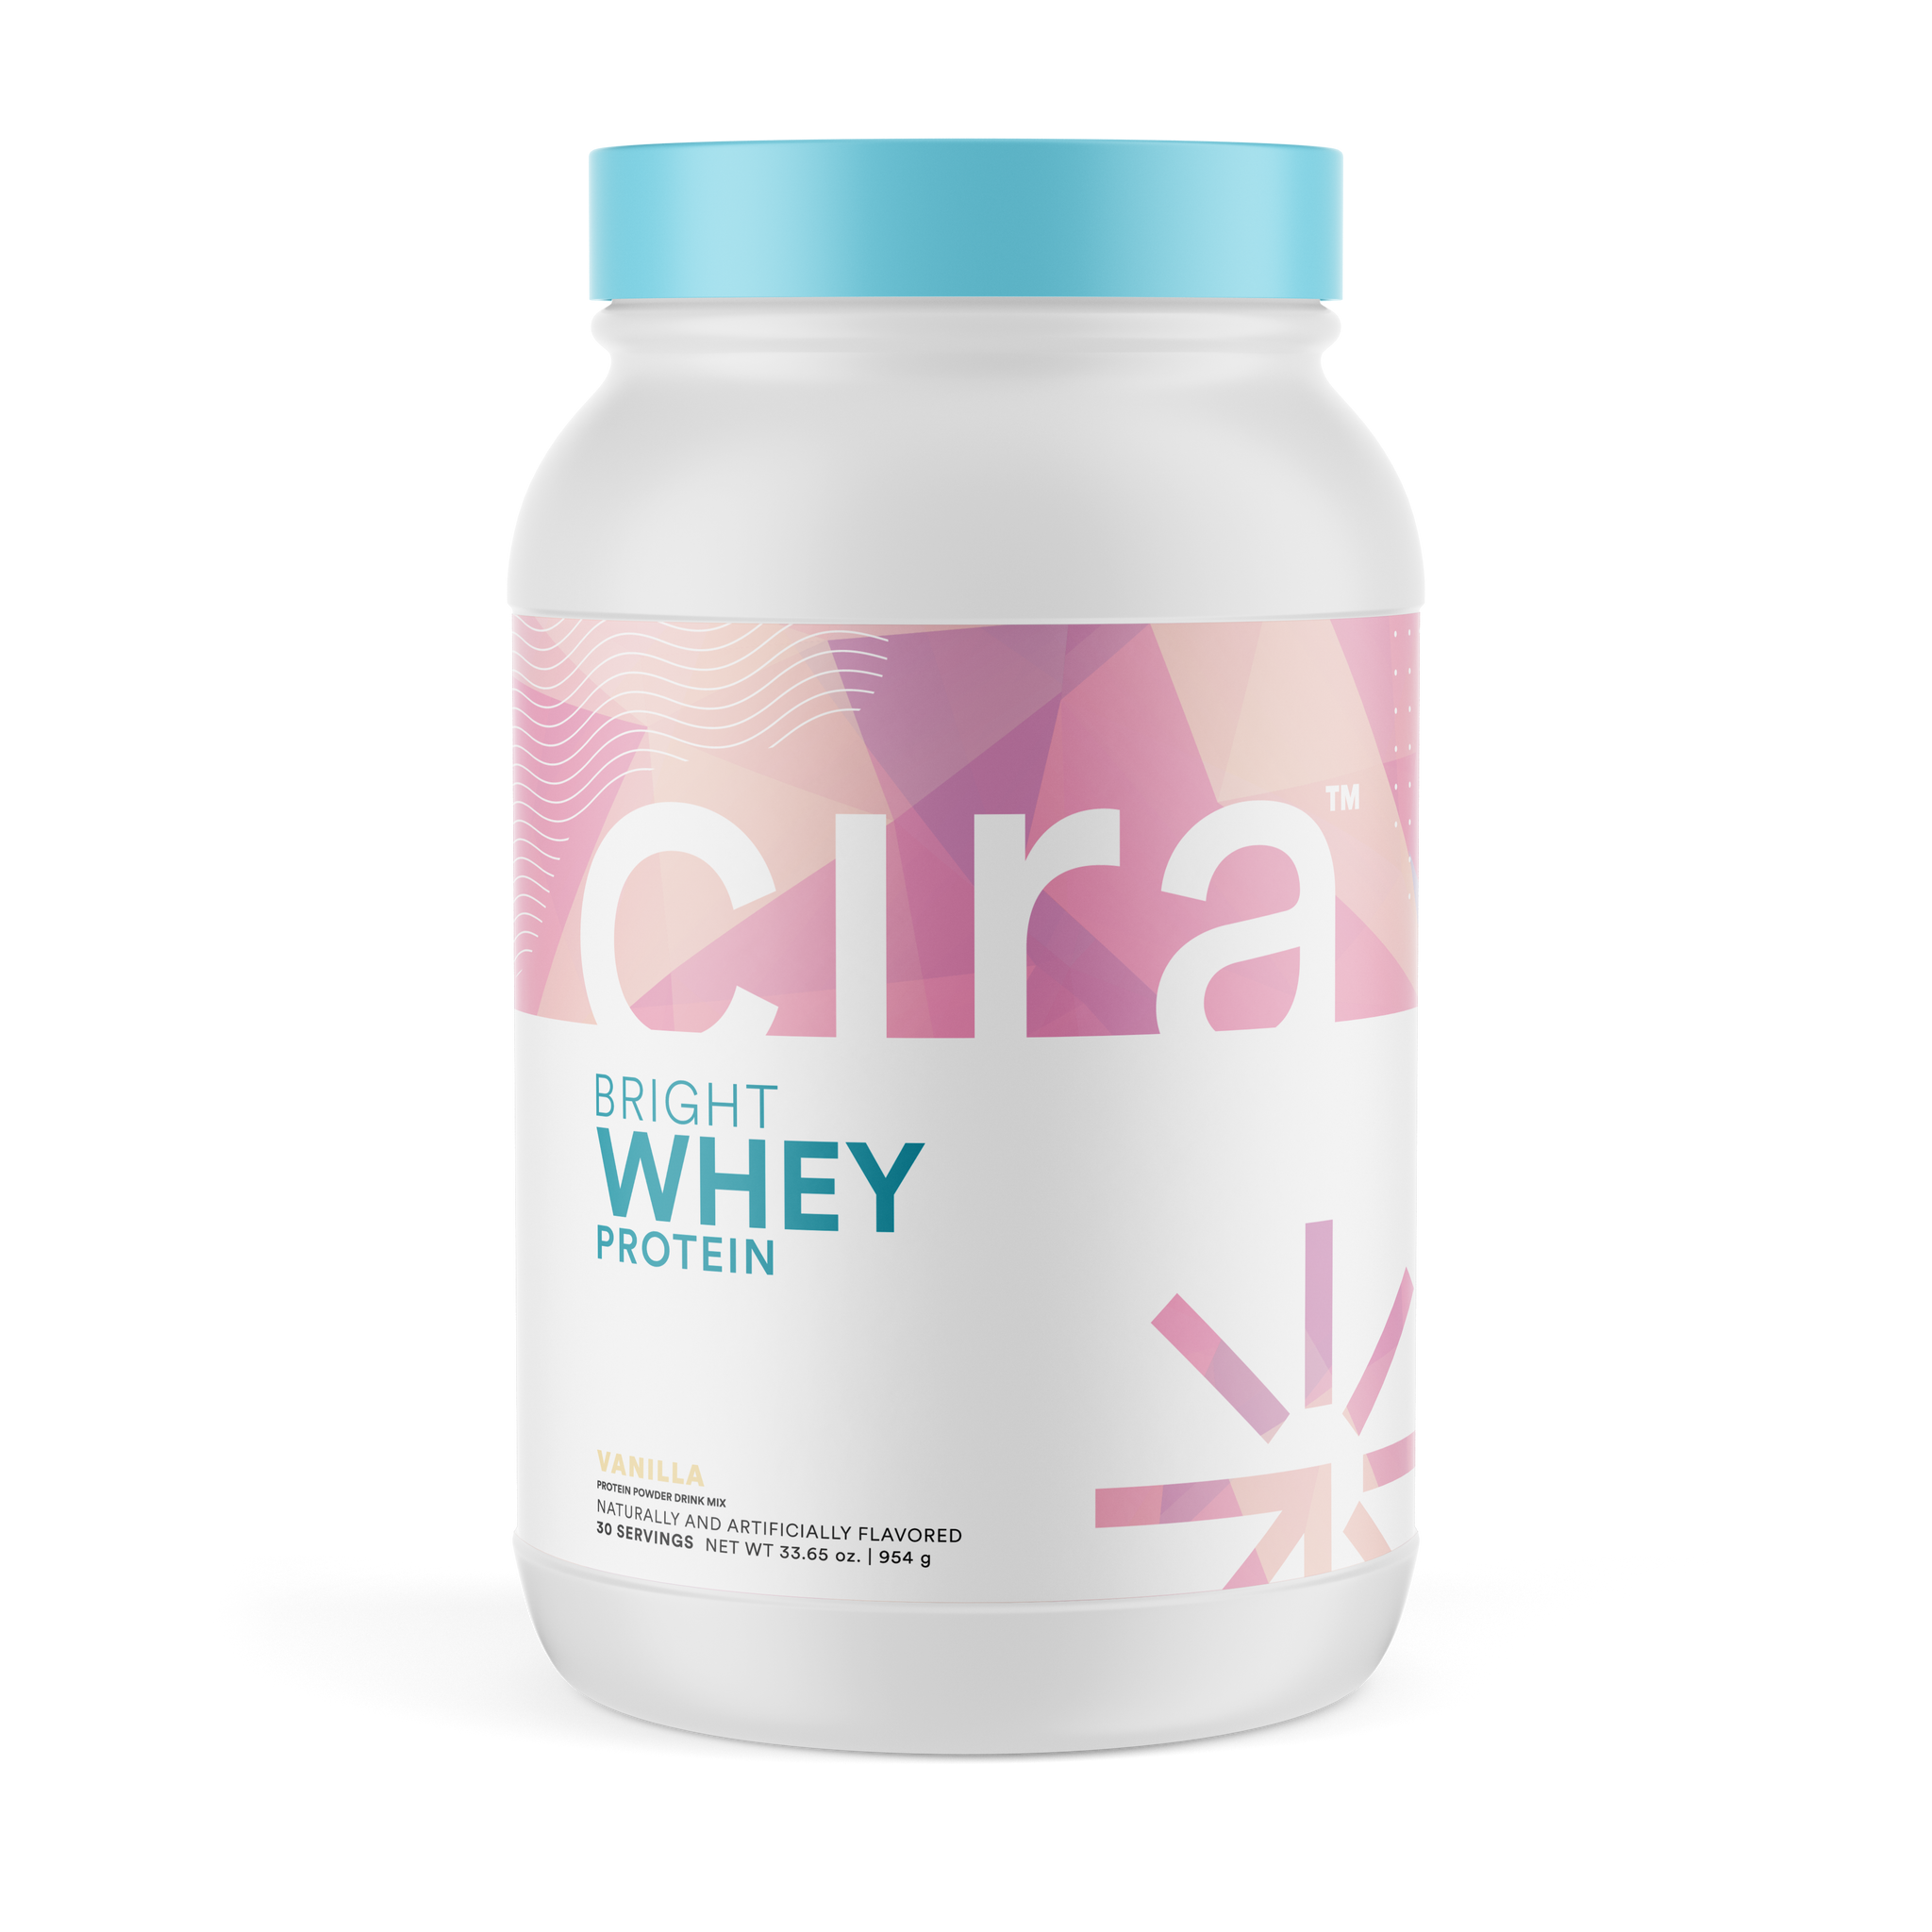 Cira Bright Whey Vanilla Protein, front view of bottle.